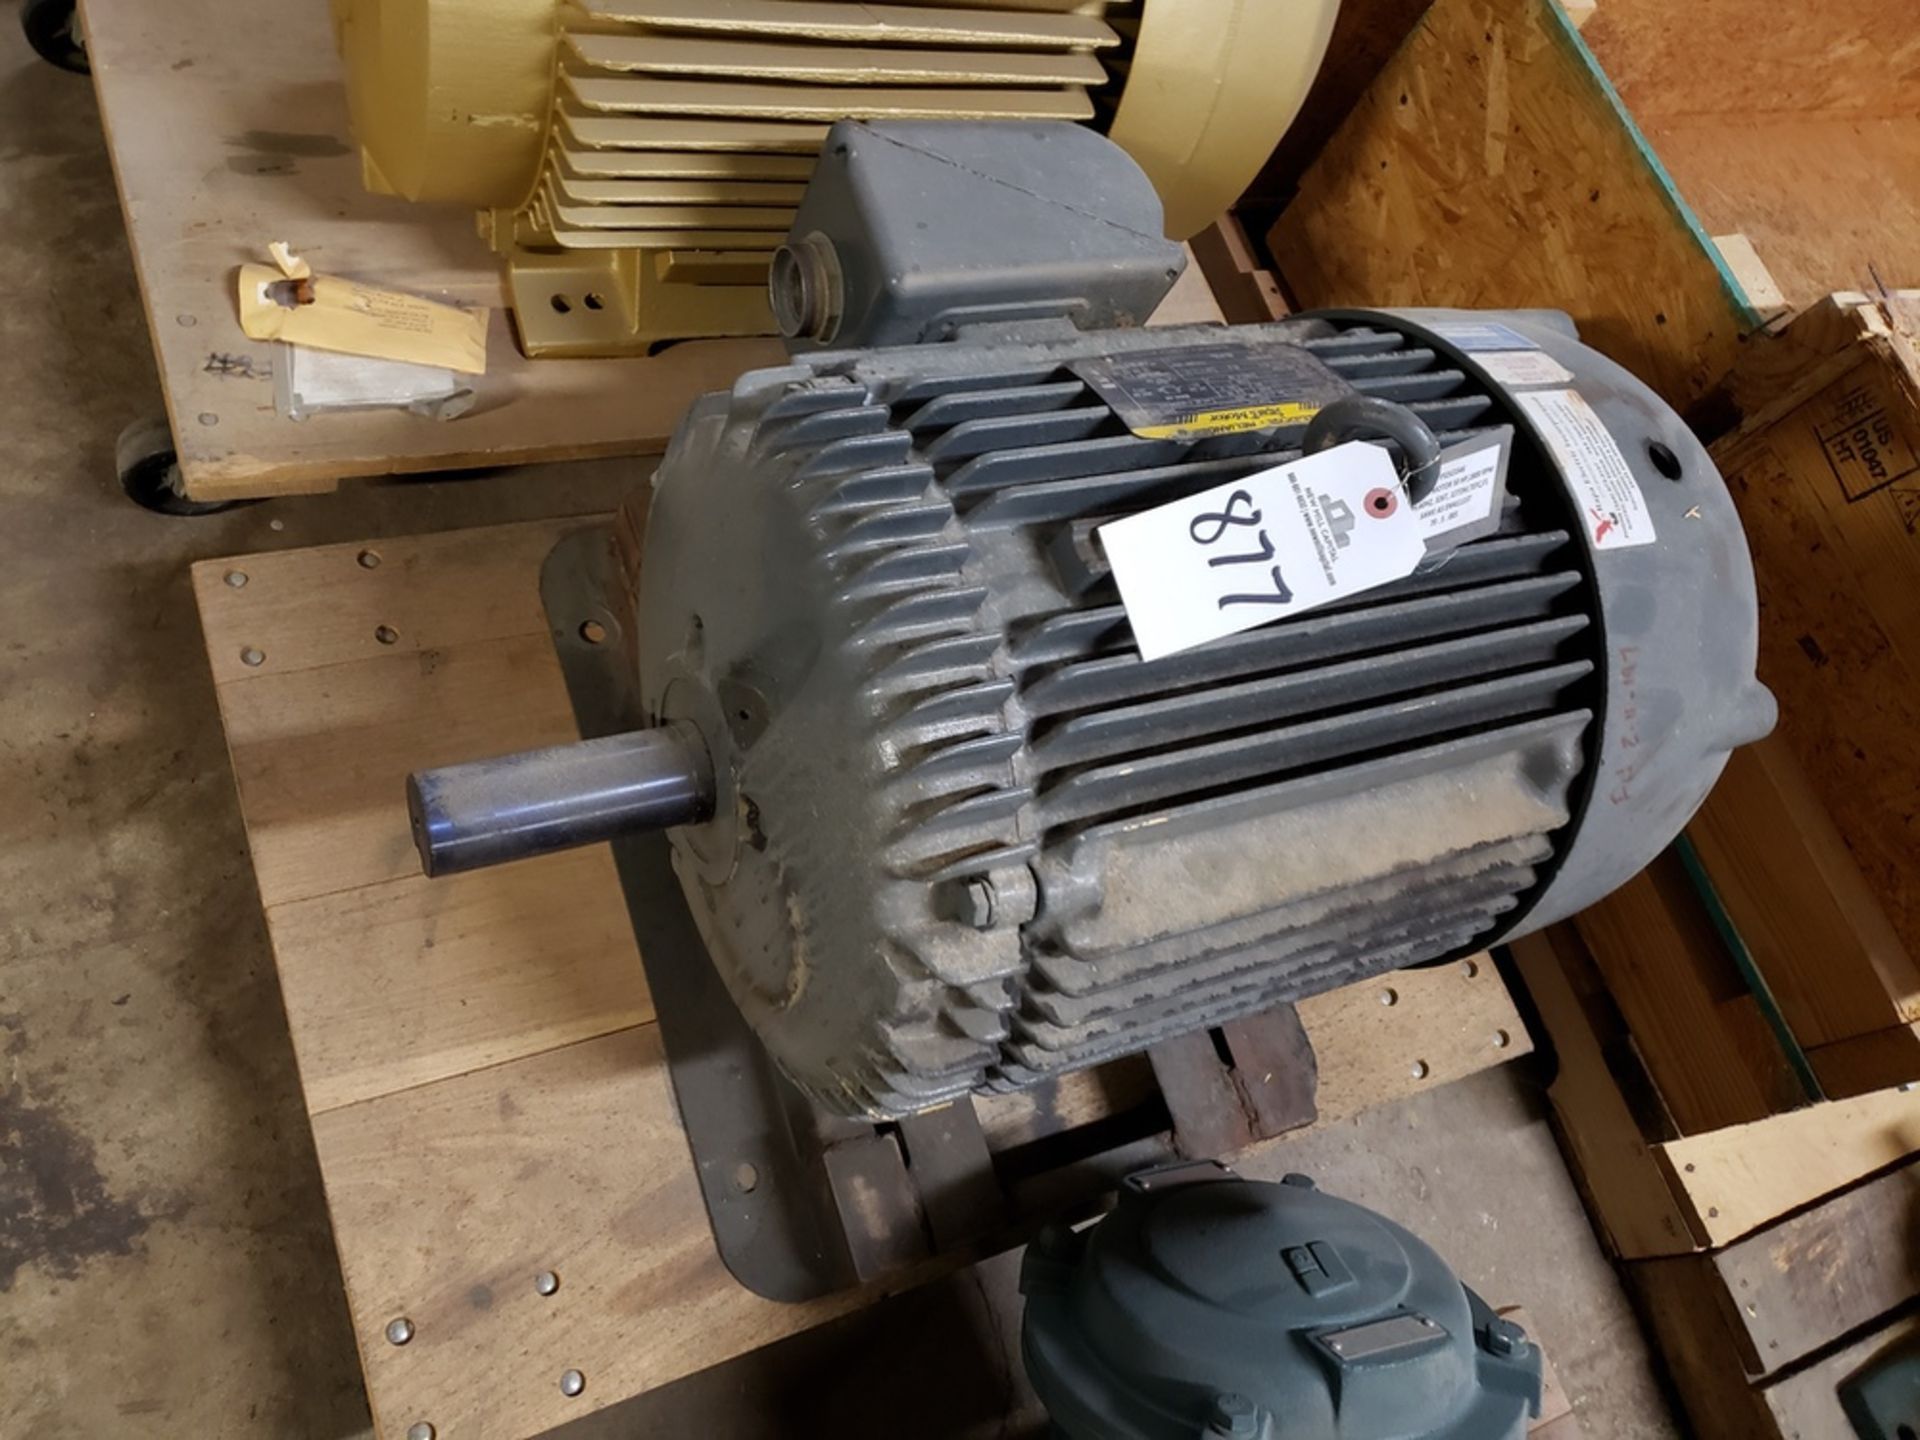 Baldor Electric Motor, 50 HP - Subject to Bulk Bid Lot 845B -The Greater of the Agg | Rig Fee: $40